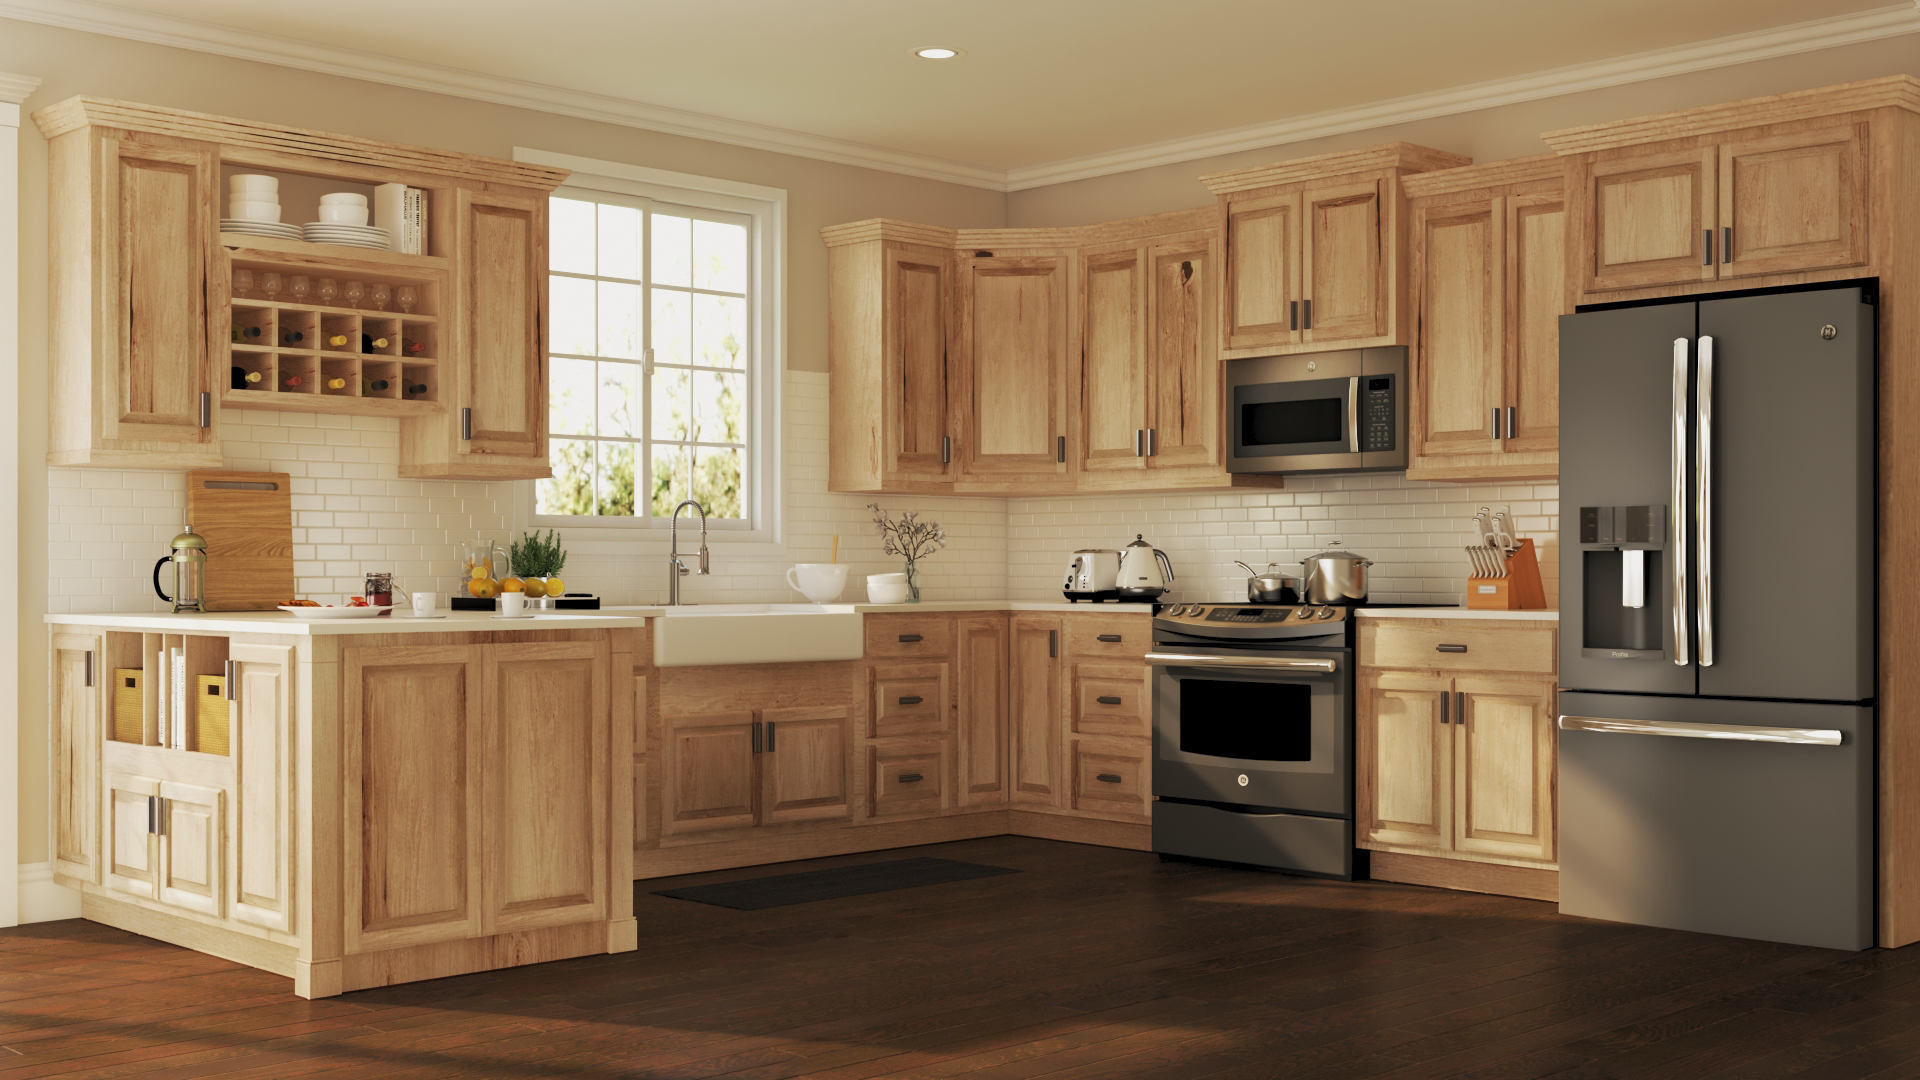 Homedepot Kitchen Cabinets
 Hampton Bath Cabinets in Natural Hickory – Kitchen – The